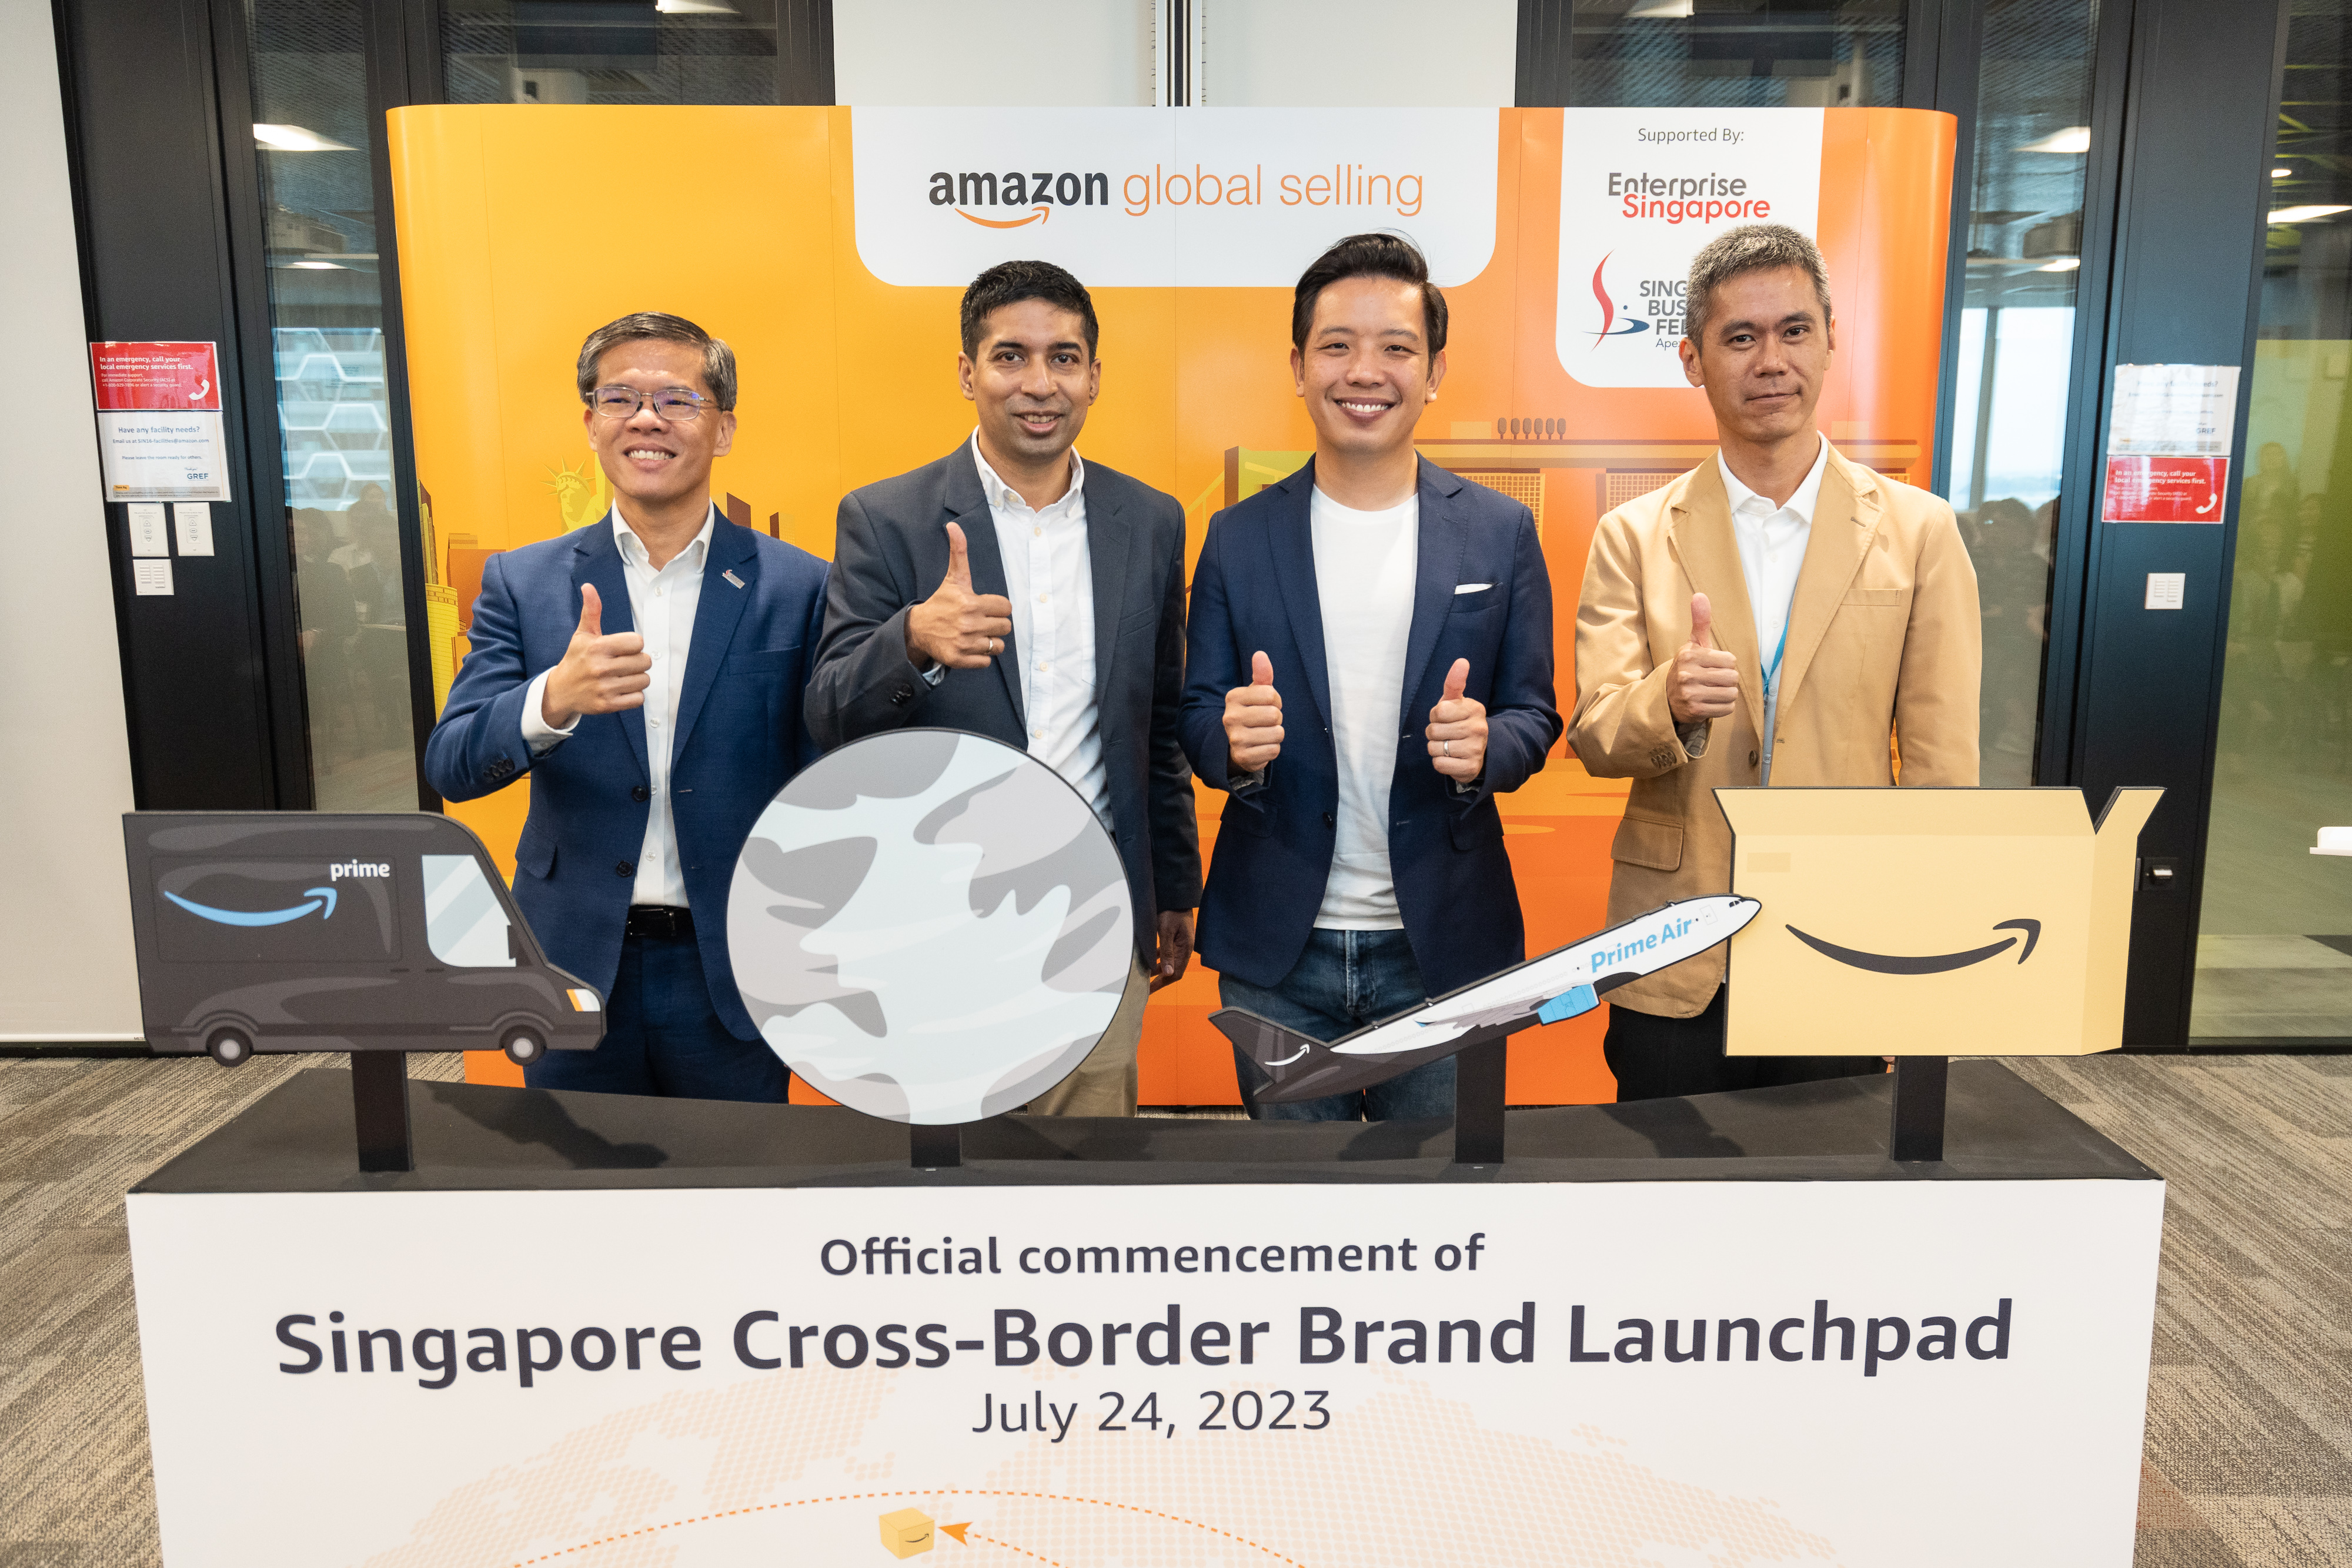 (L-R) Image of Kok Ping Soon, CEO of Singapore Business Federation; Anand Palit, Head of Amazon Global Selling, Southeast Asia; Alvin Tan, Minister of State for Trade and Industry and Soh Leng Wan